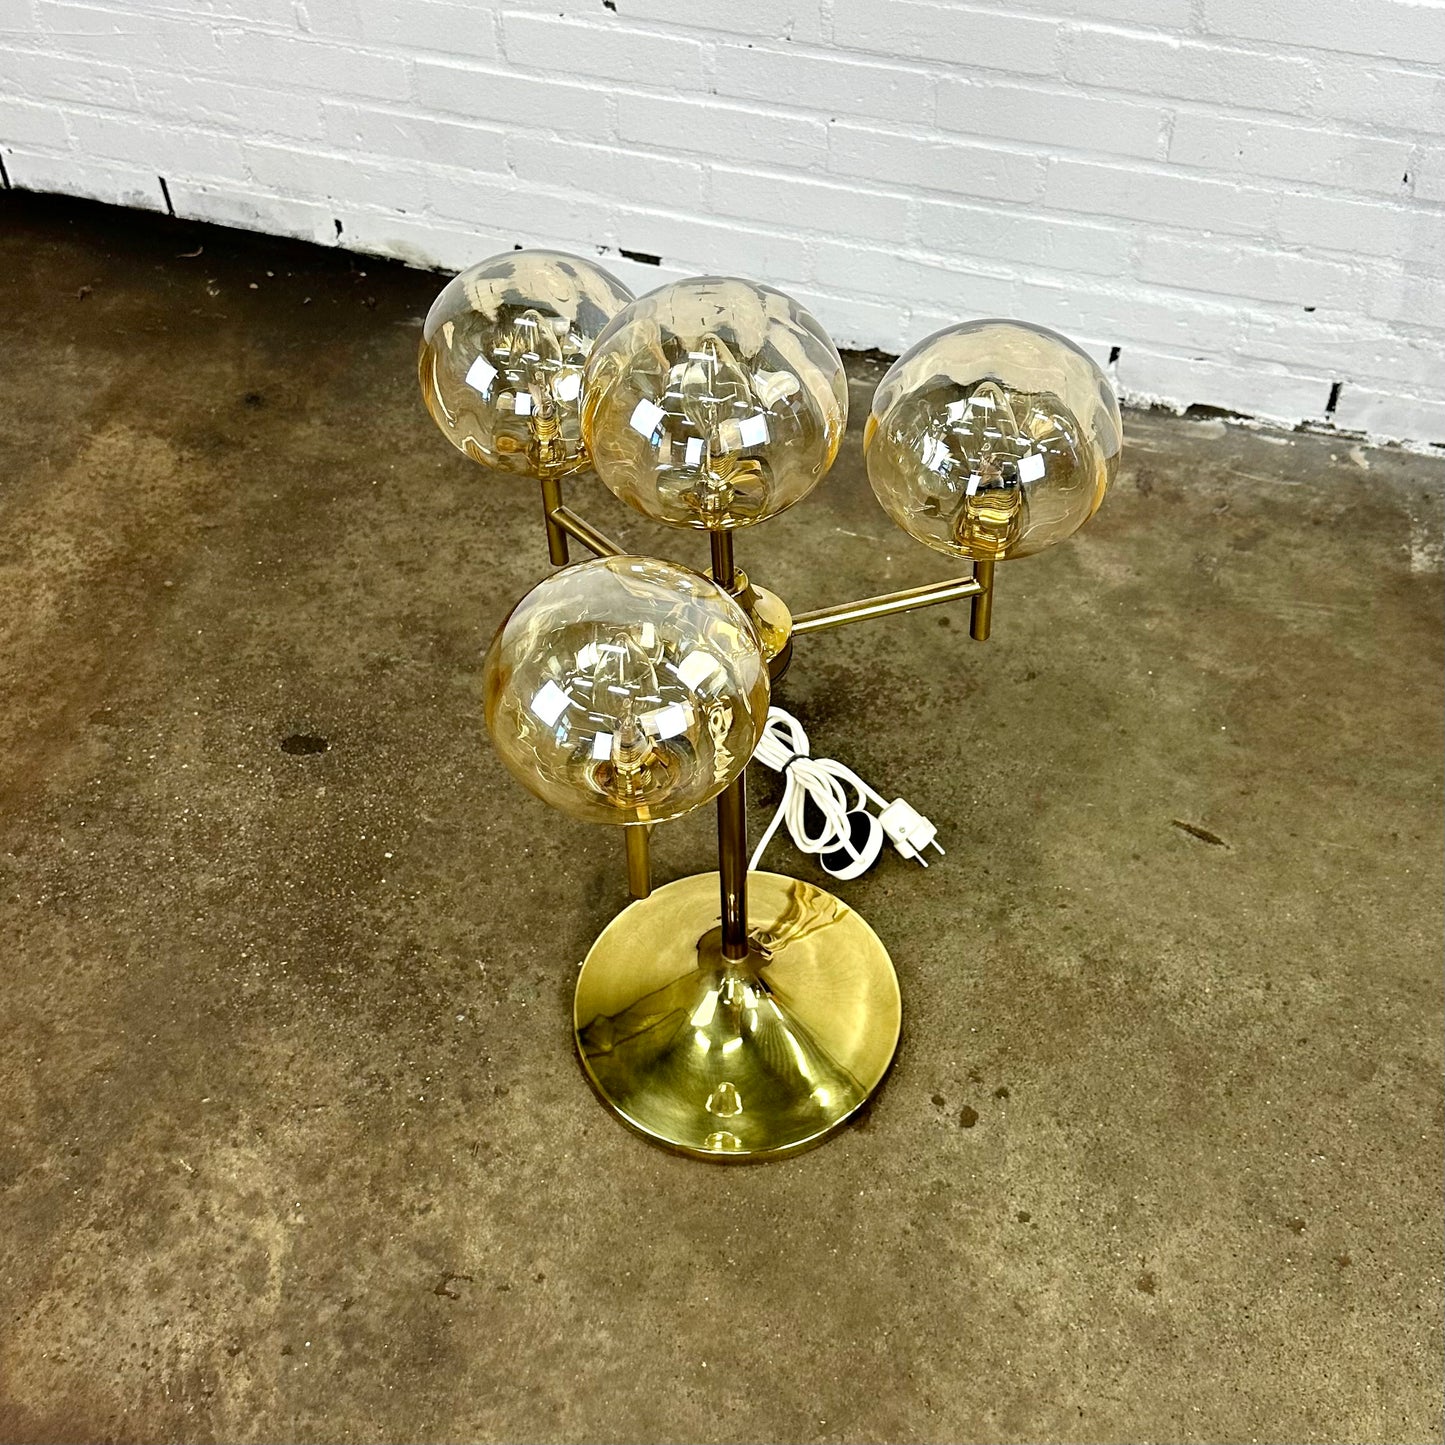 Vintage ball table lamp with brass frame